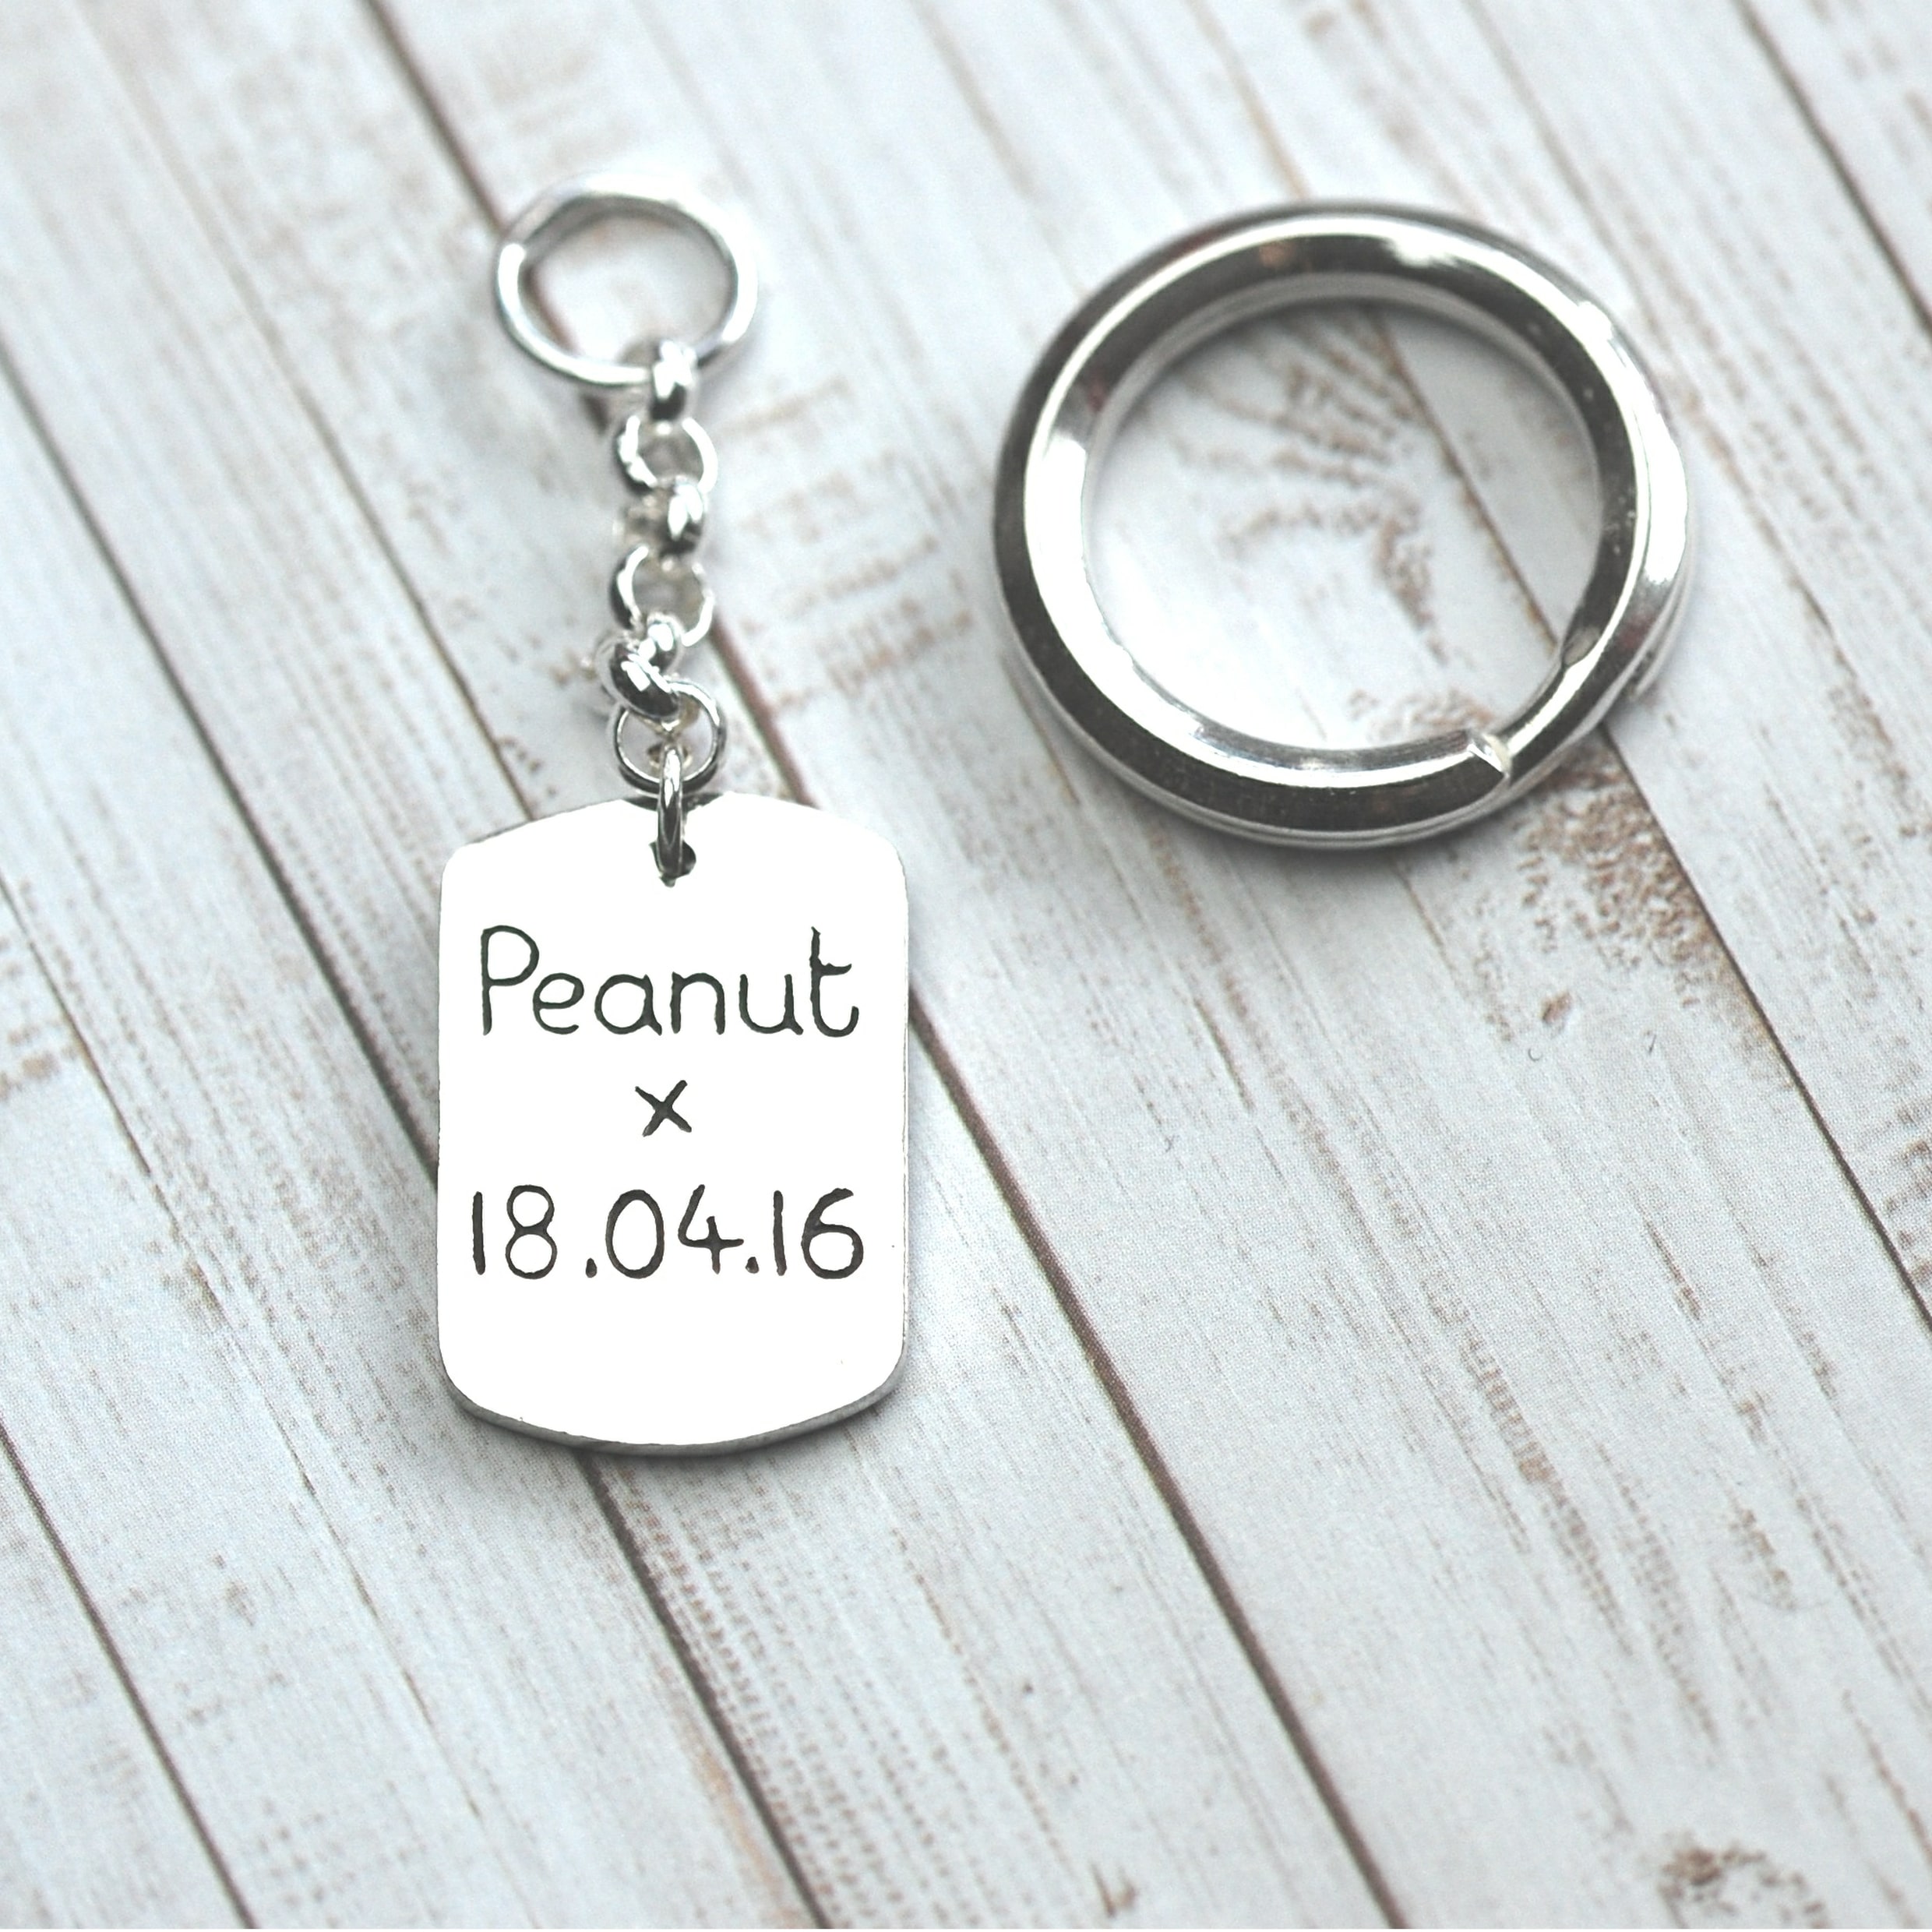 Name and date inscribed on back of paw print keyring